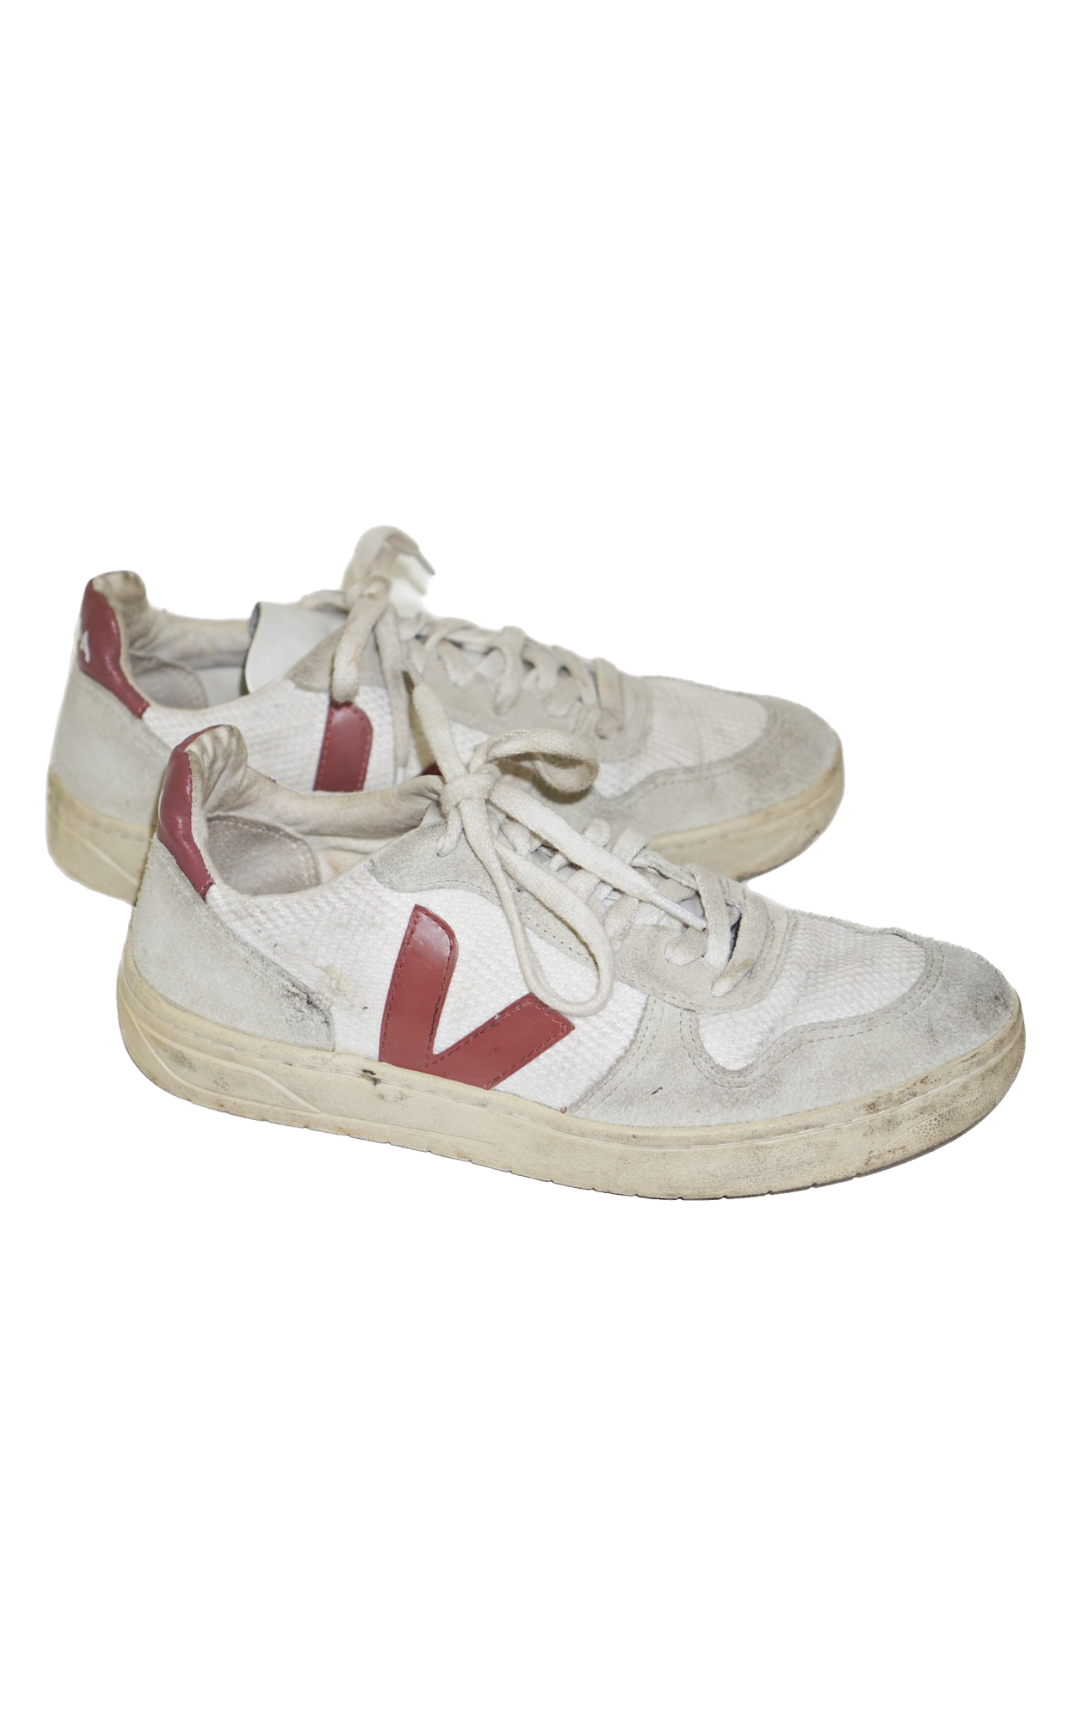 VEJA Logo Lace Up Sustainable Beige Sneakers resellum